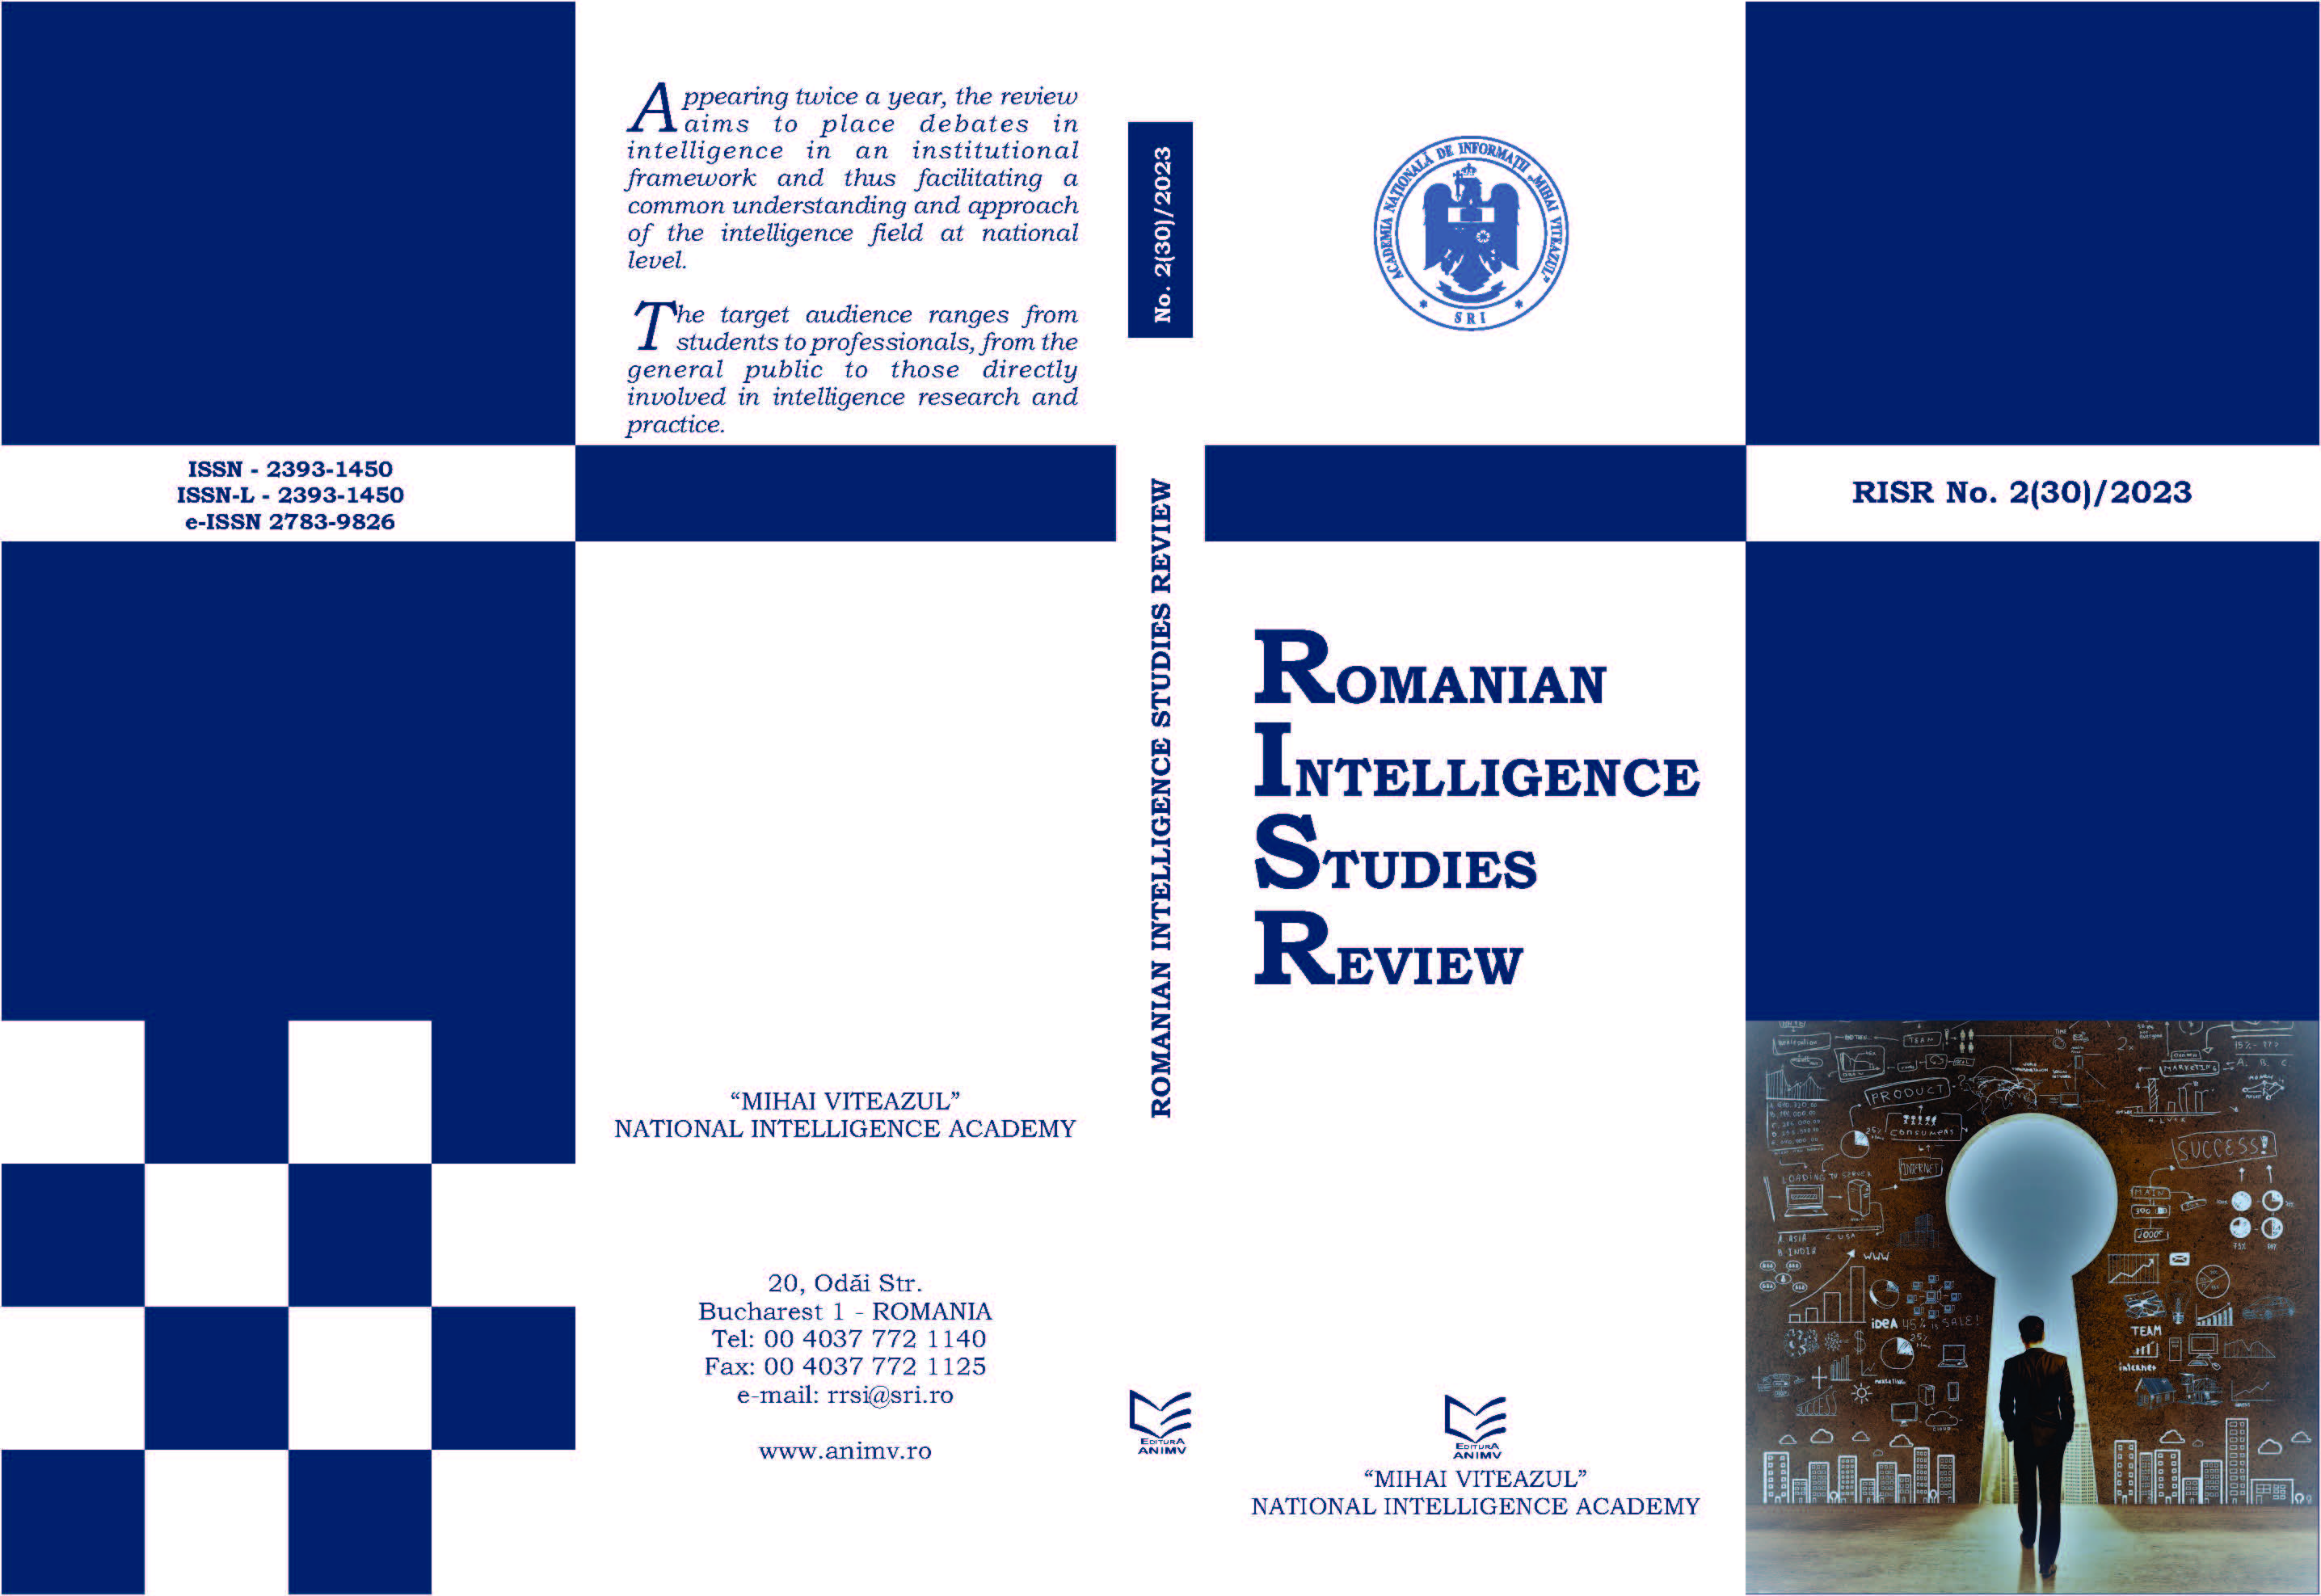 Bogdan Teodor, Jordan Baev, Matthew Crosston, Mihaela Teodor (eds.), Old and New Insights on the History of Intelligence and Diplomacy in the Balkans, Peter Lang Publishing Inc., New York, 2023, 326p. Cover Image